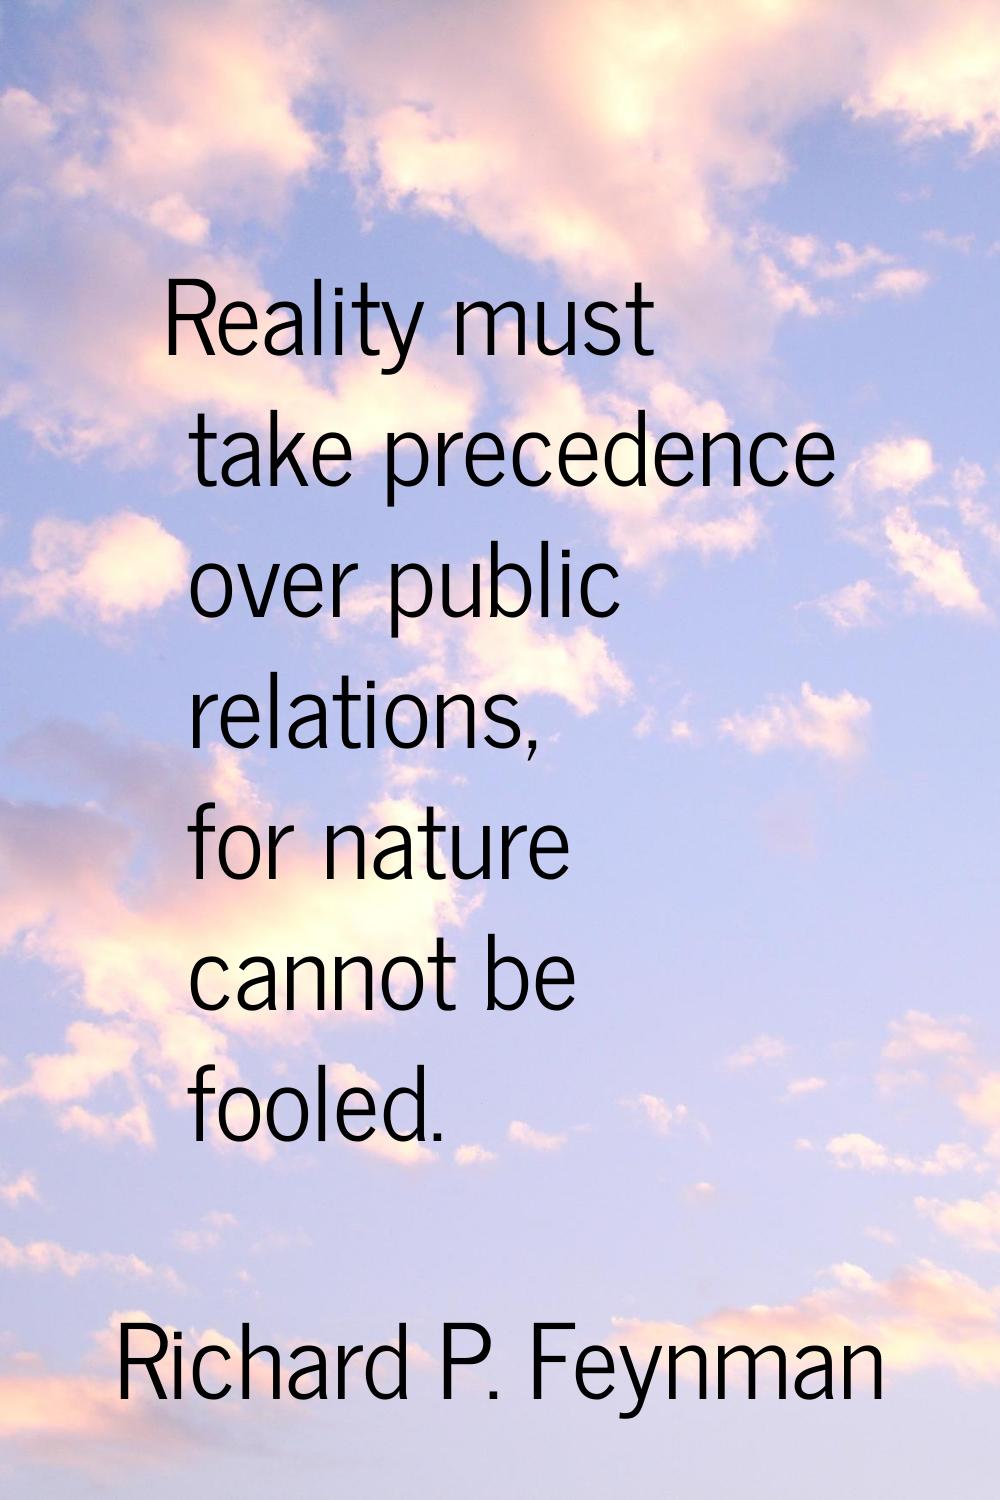 Reality must take precedence over public relations, for nature cannot be fooled.